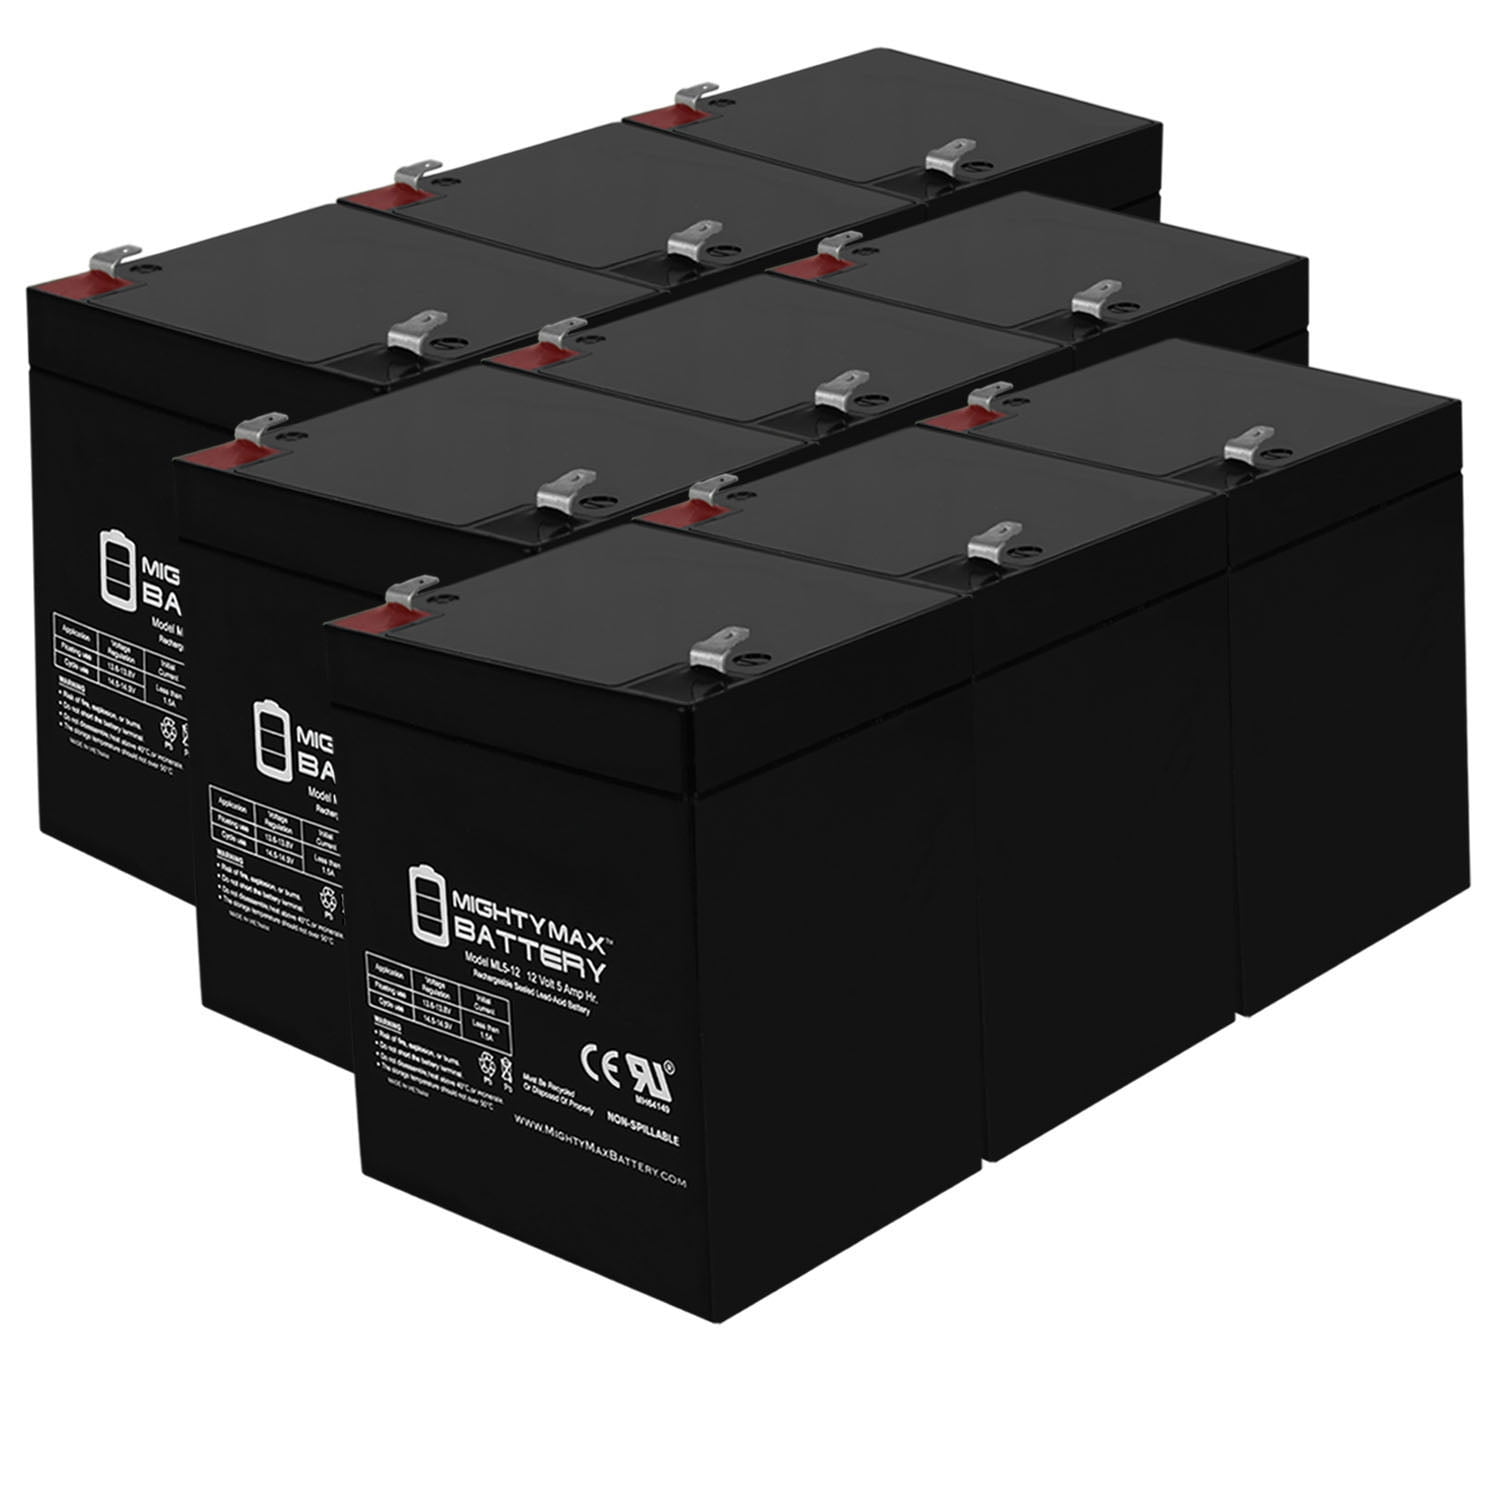 Mighty Max Battery 12V 5Ah F1 UPS Battery for Belkin Pro F6C325-12 Pack Brand Product 